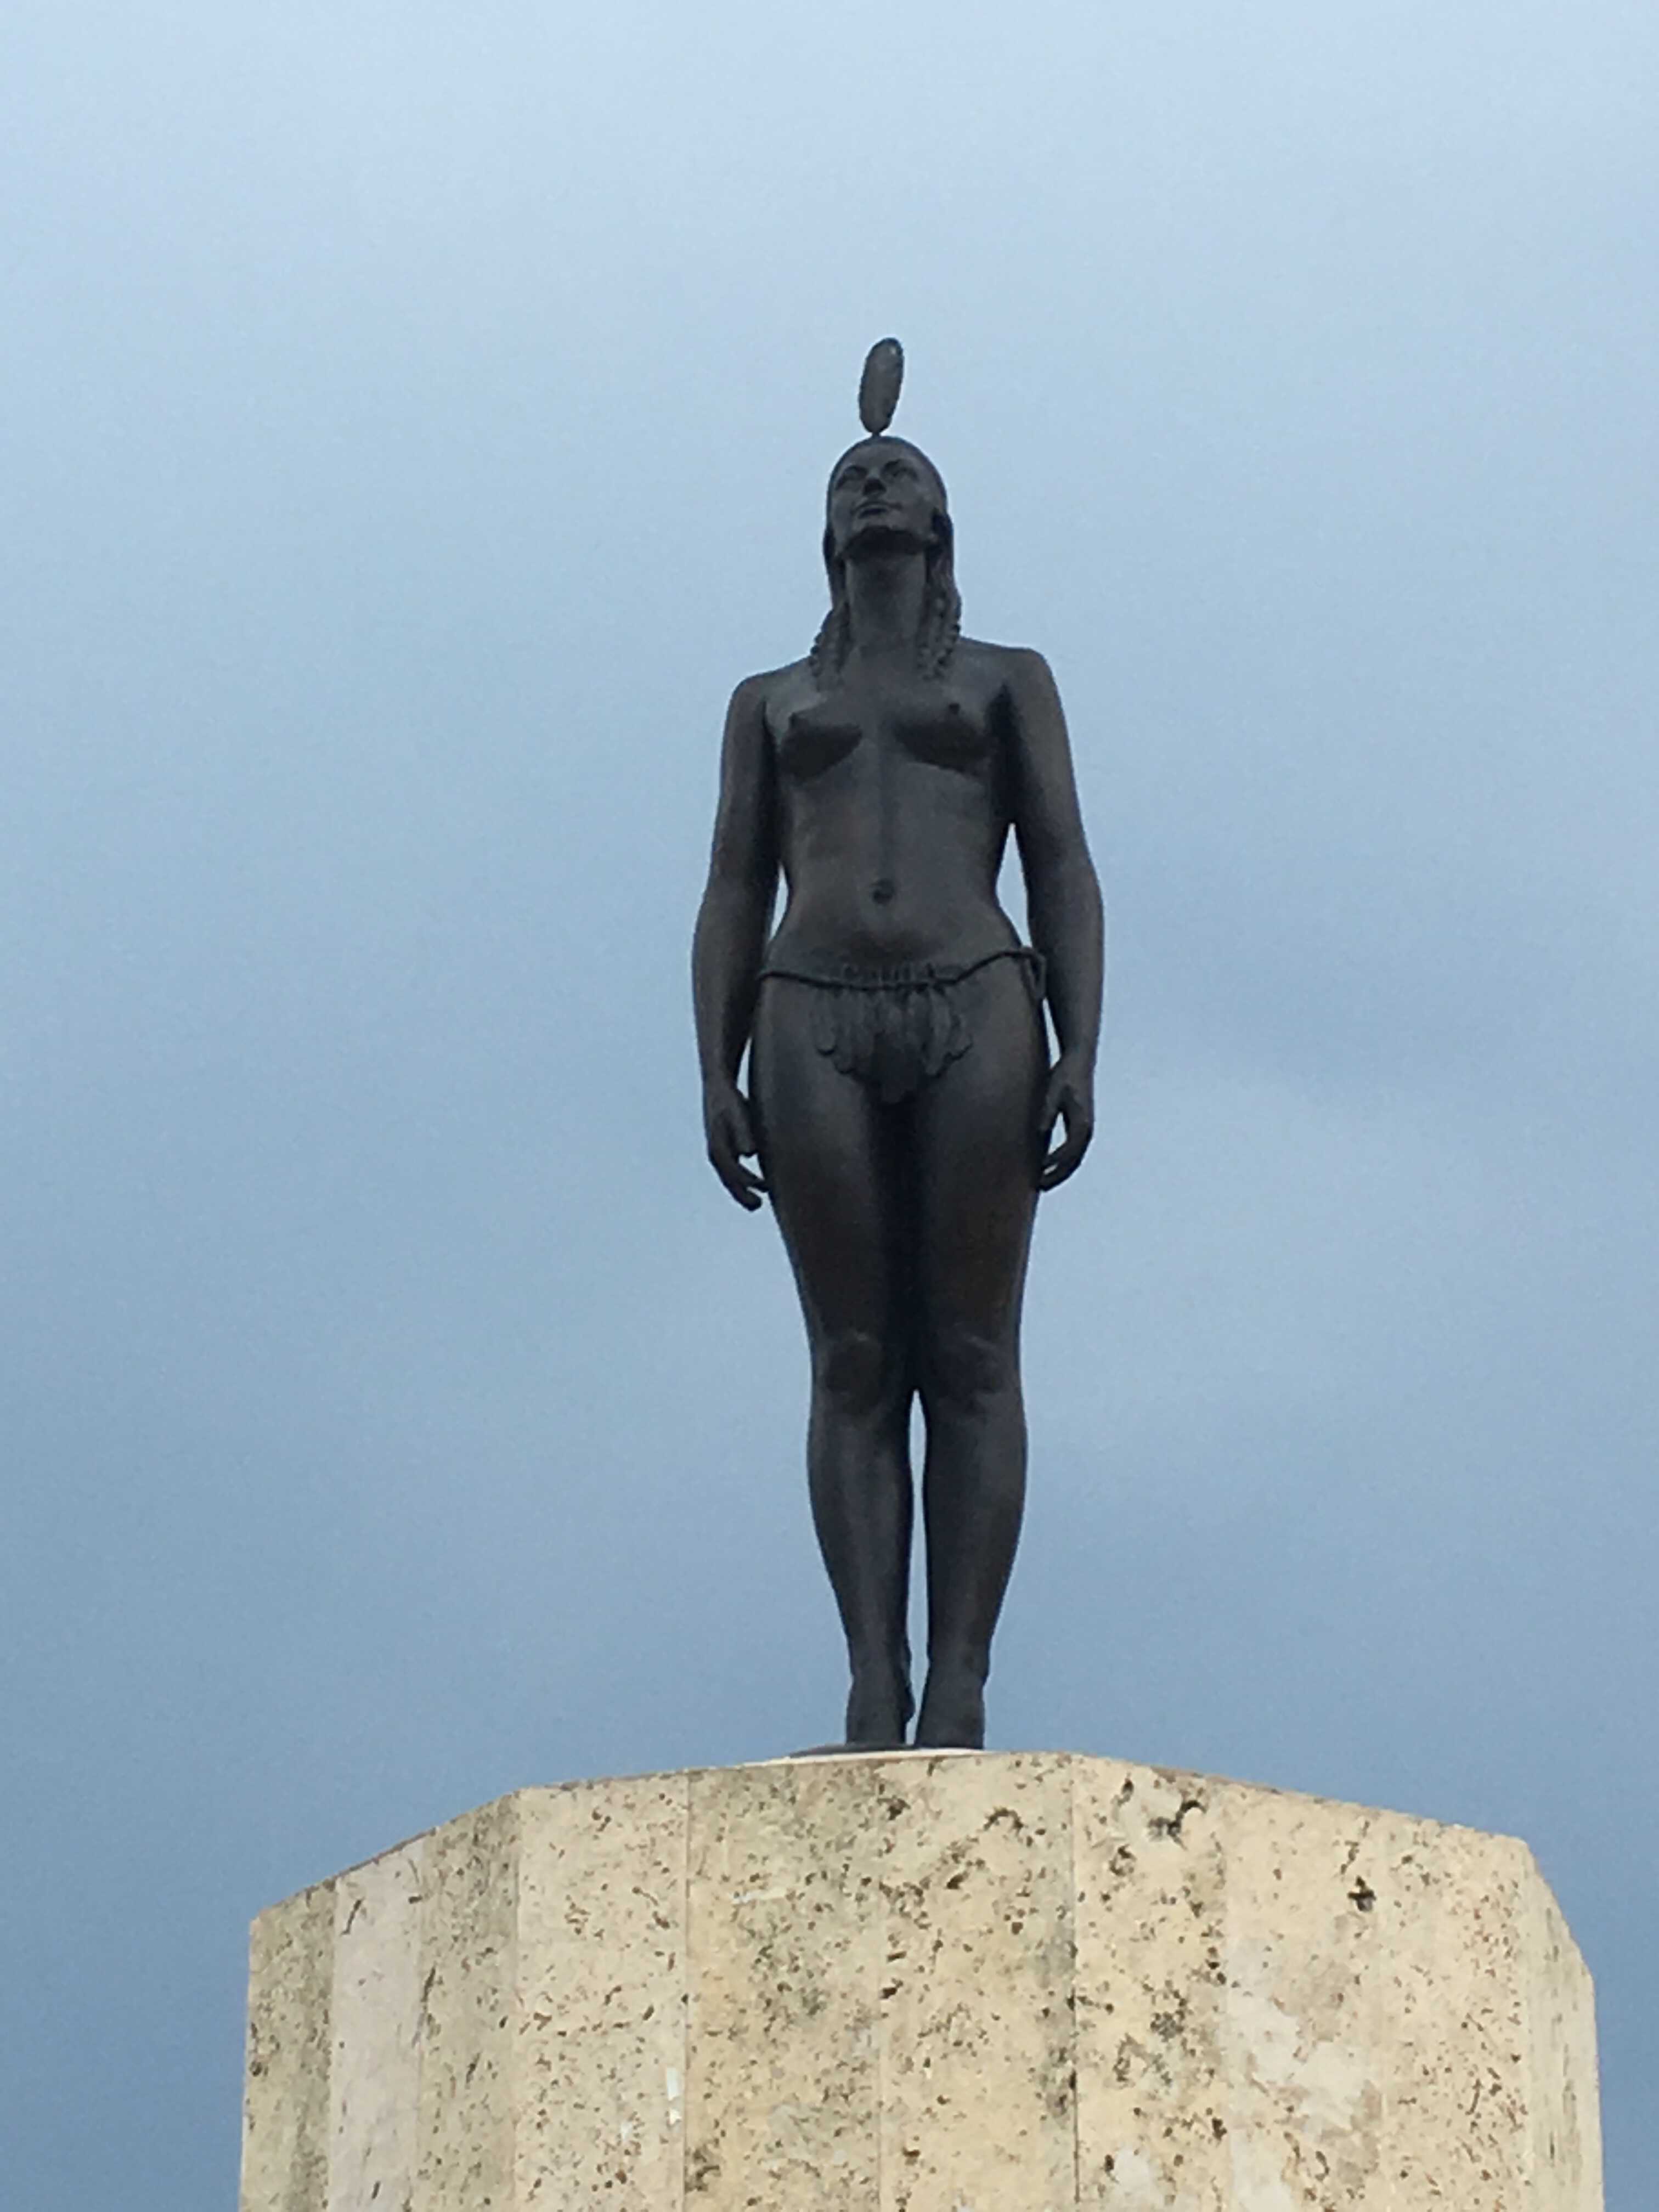 Monument to India Catalina in Cartagena, Colombia